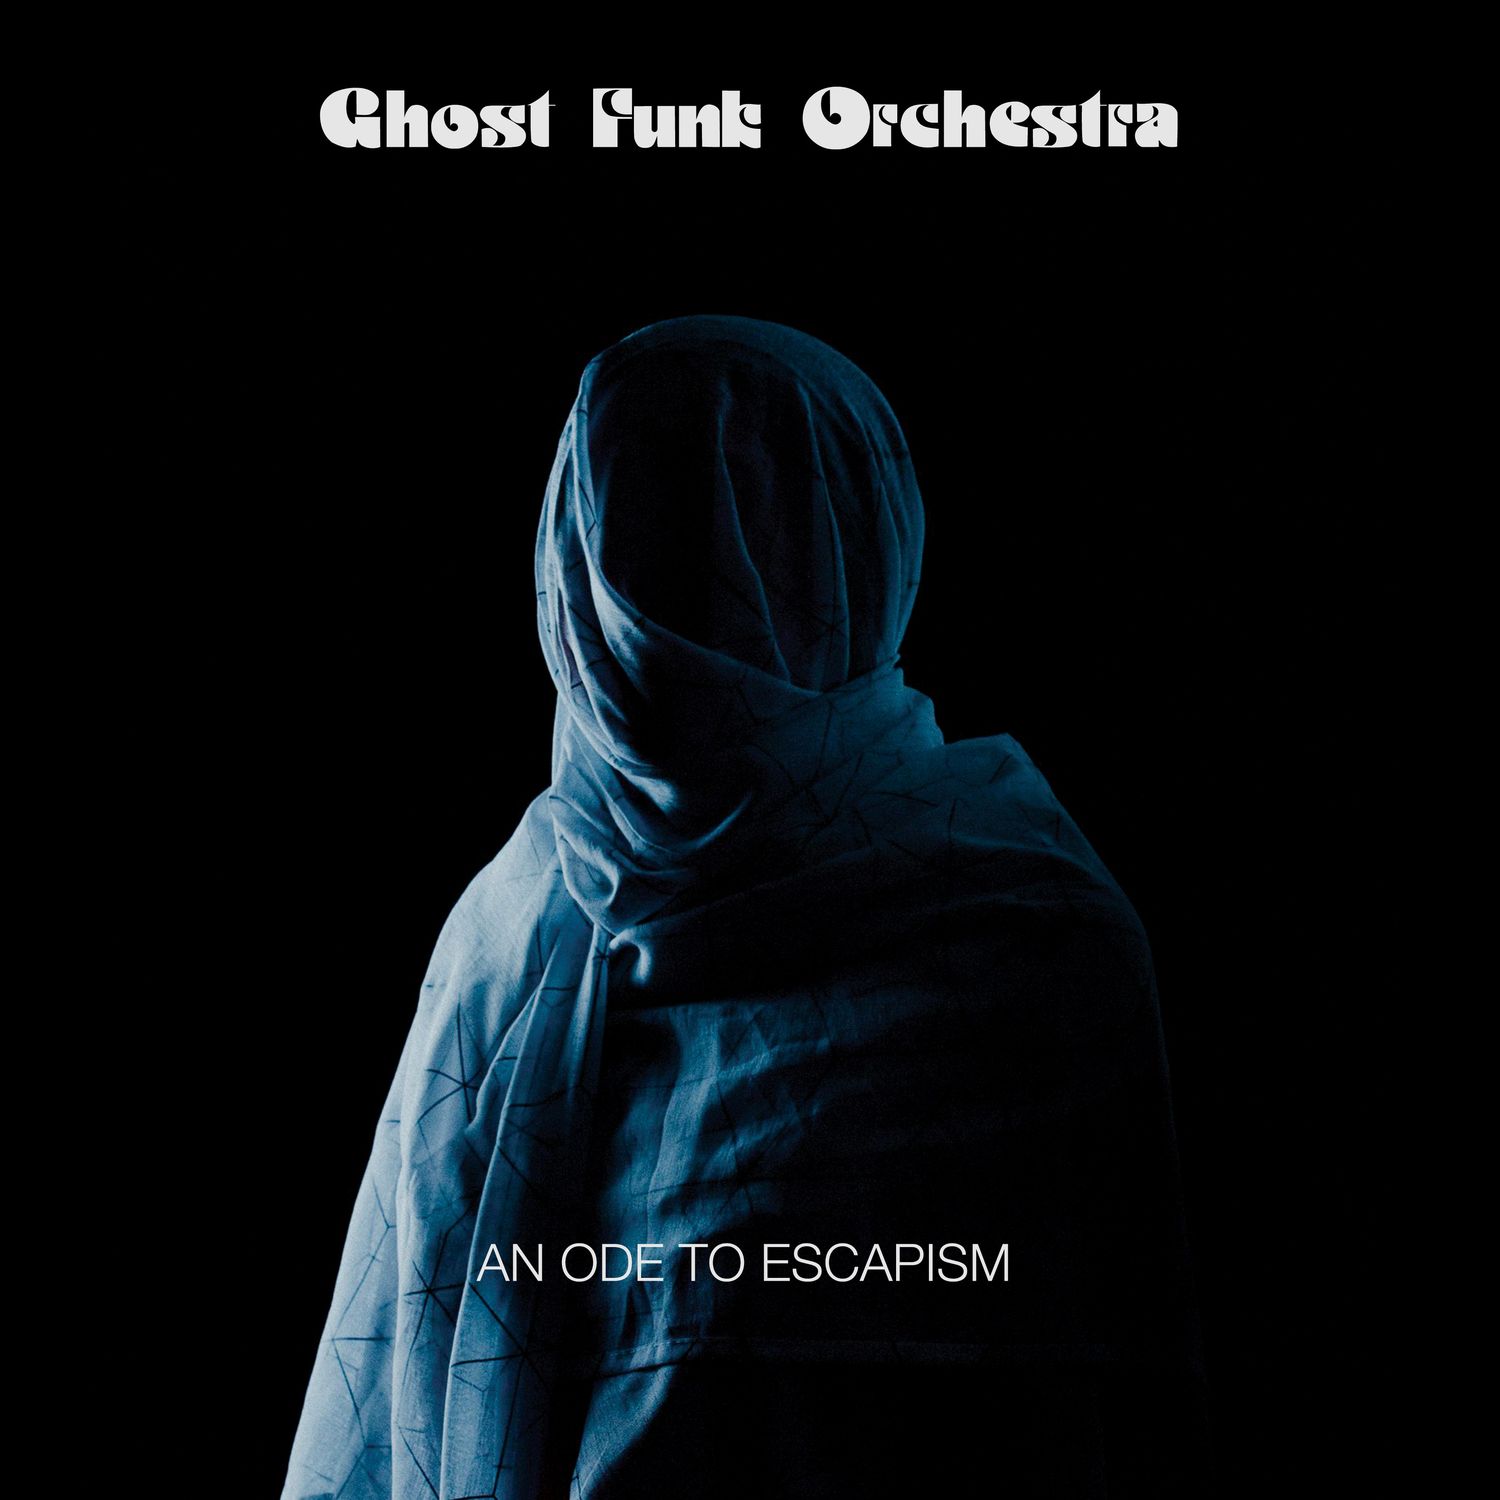 Ghost Funk Orchestra – An Ode To Escapism (2020) [FLAC 24bit/44,1kHz]